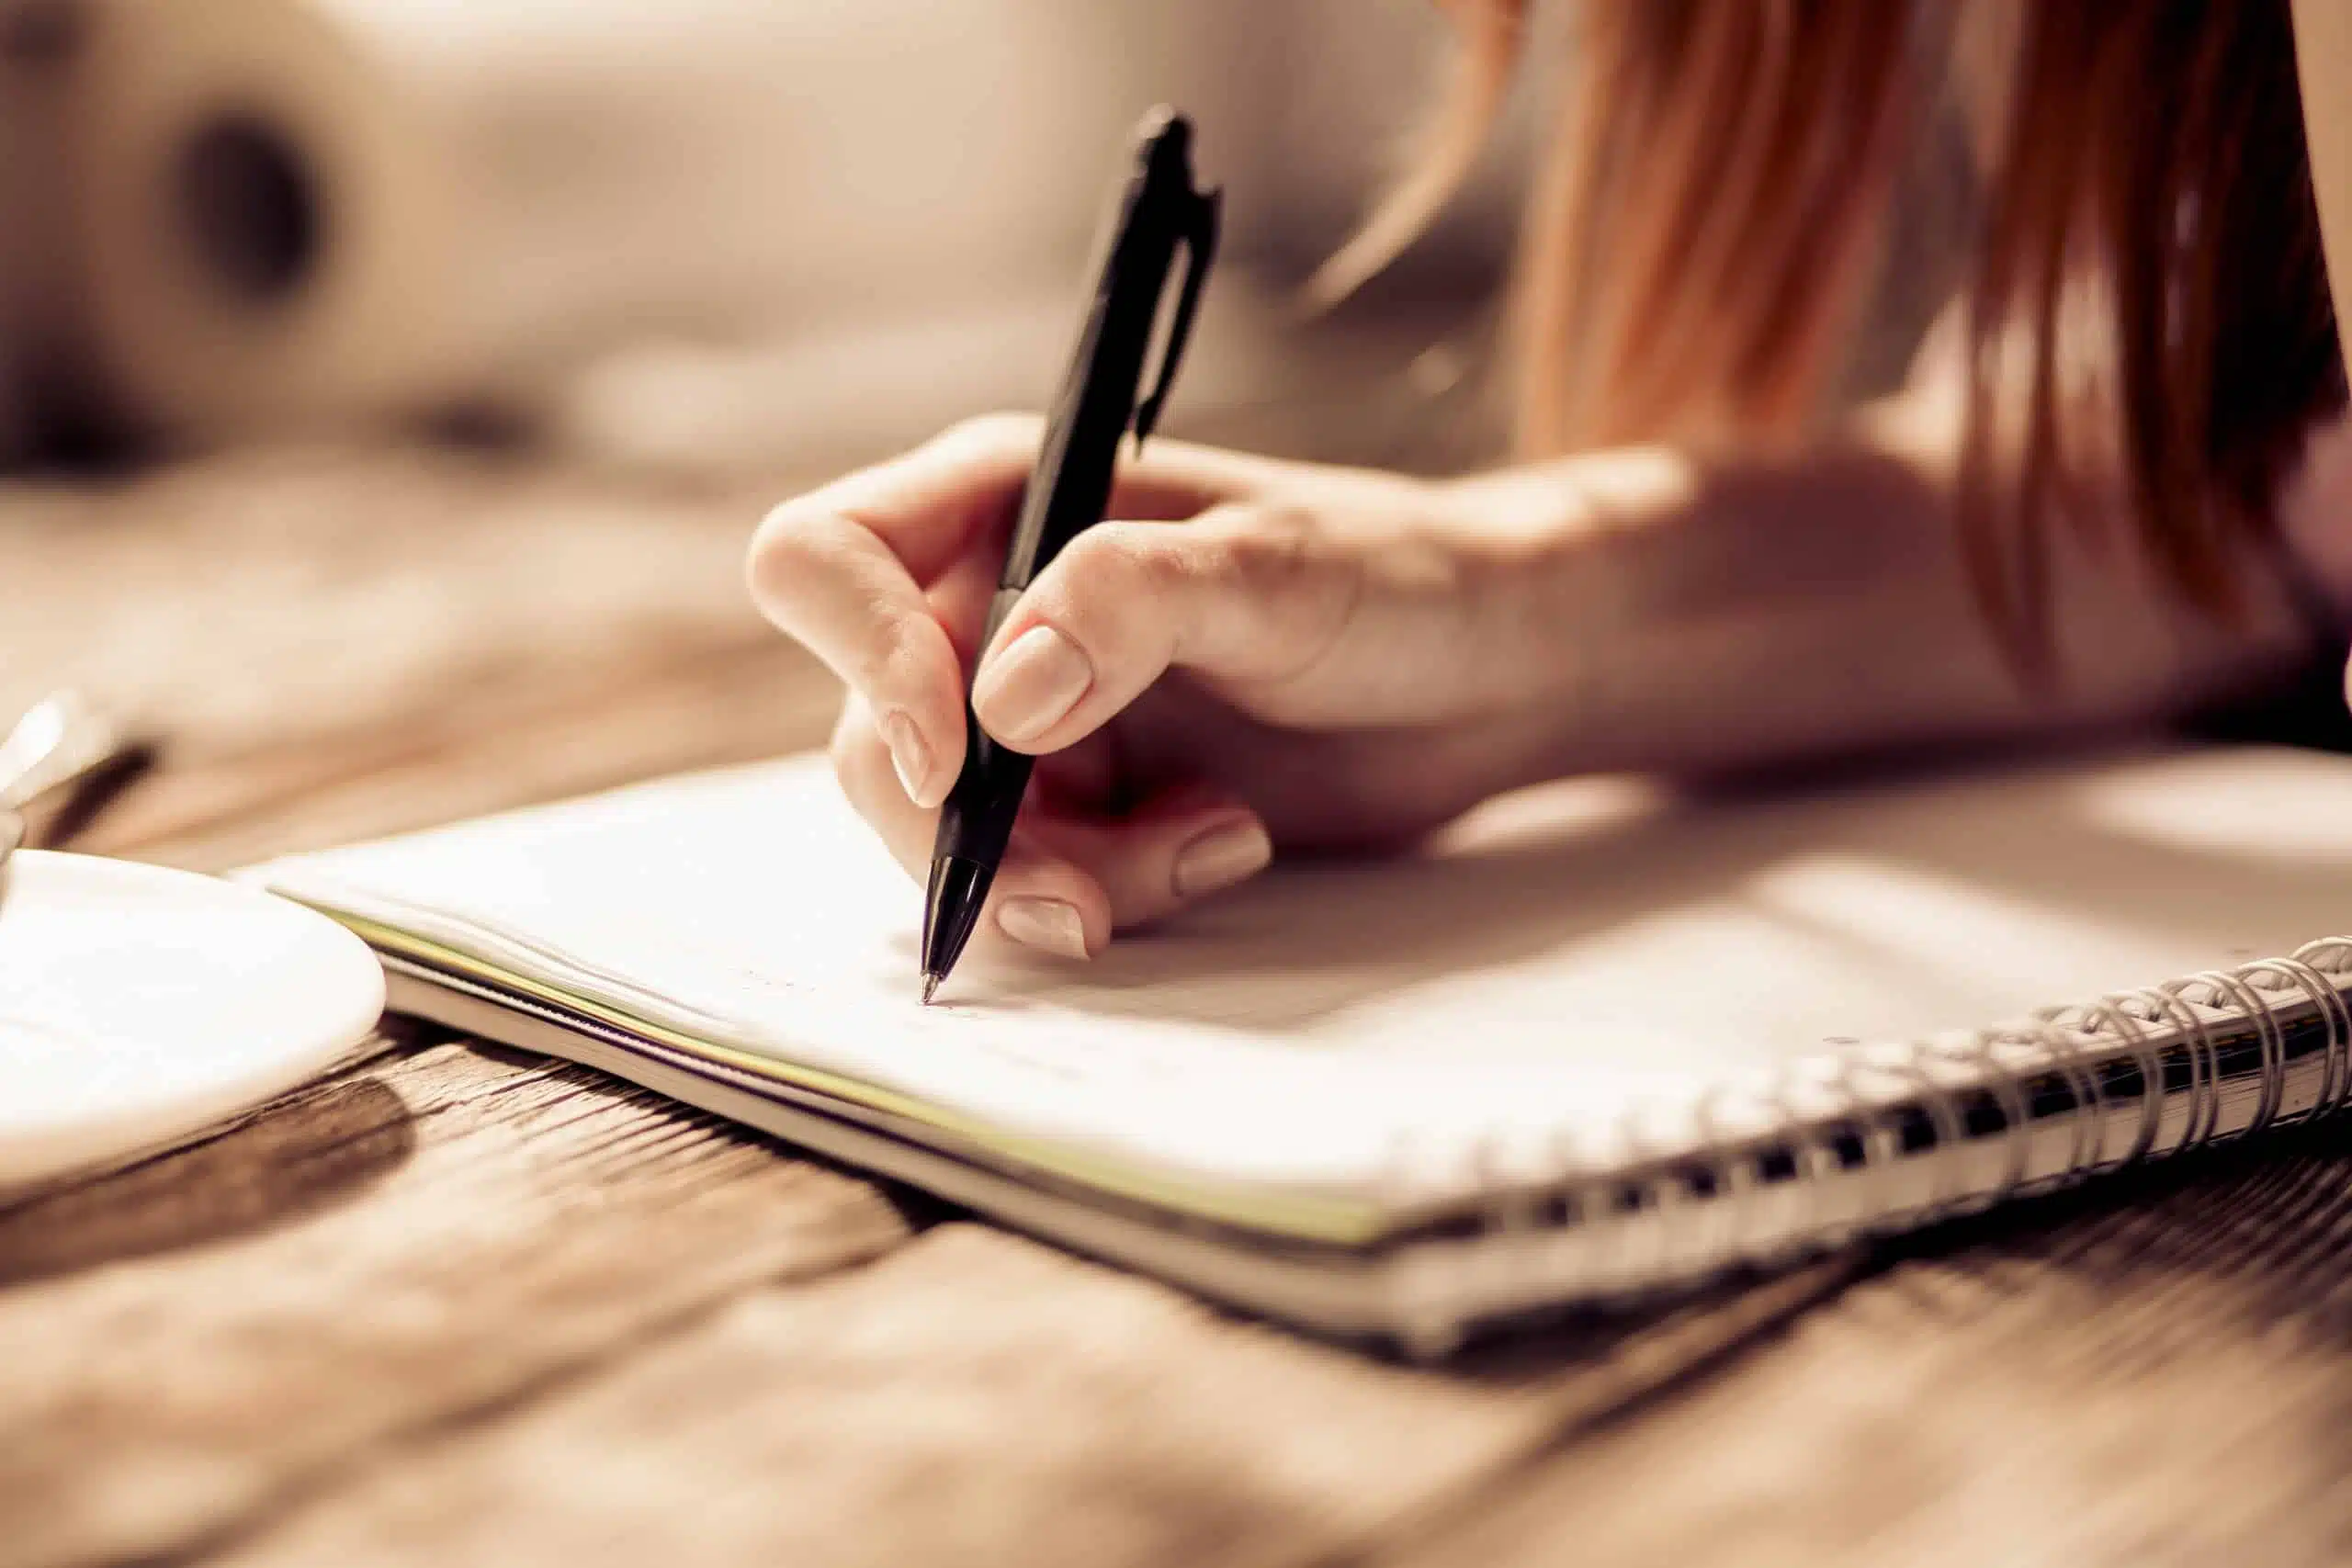 Woman writing with pen on notebook on wooden table.